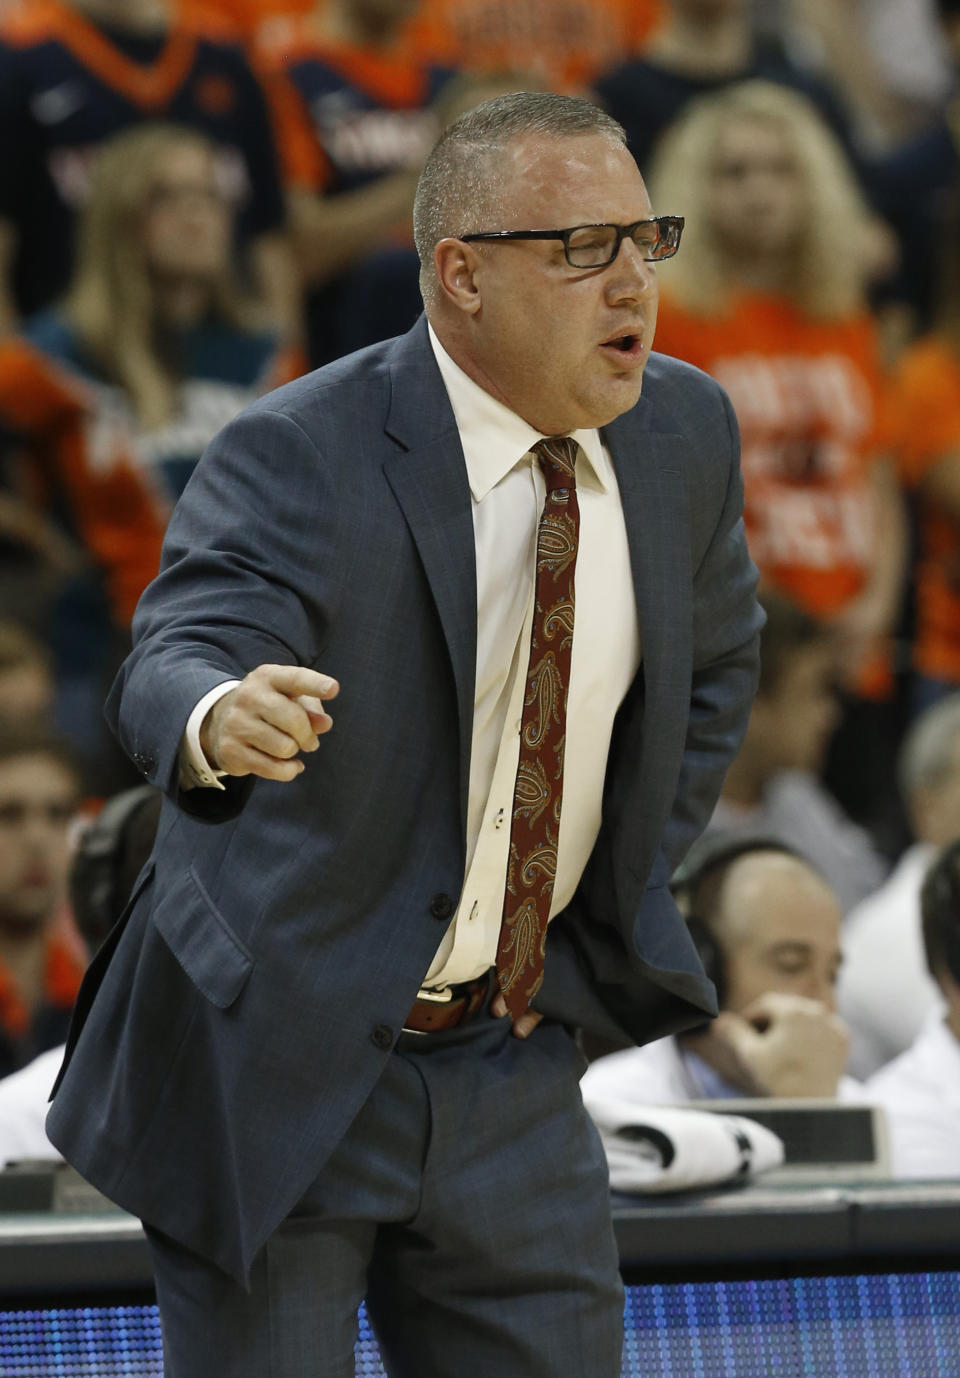 Virginia Tech head coach Buzz Williams directs his team during the first half of an NCAA college basketball game against Virginia, in Charlottesville, Va., Tuesday, Jan. 15, 2019. (AP Photo/Steve Helber)